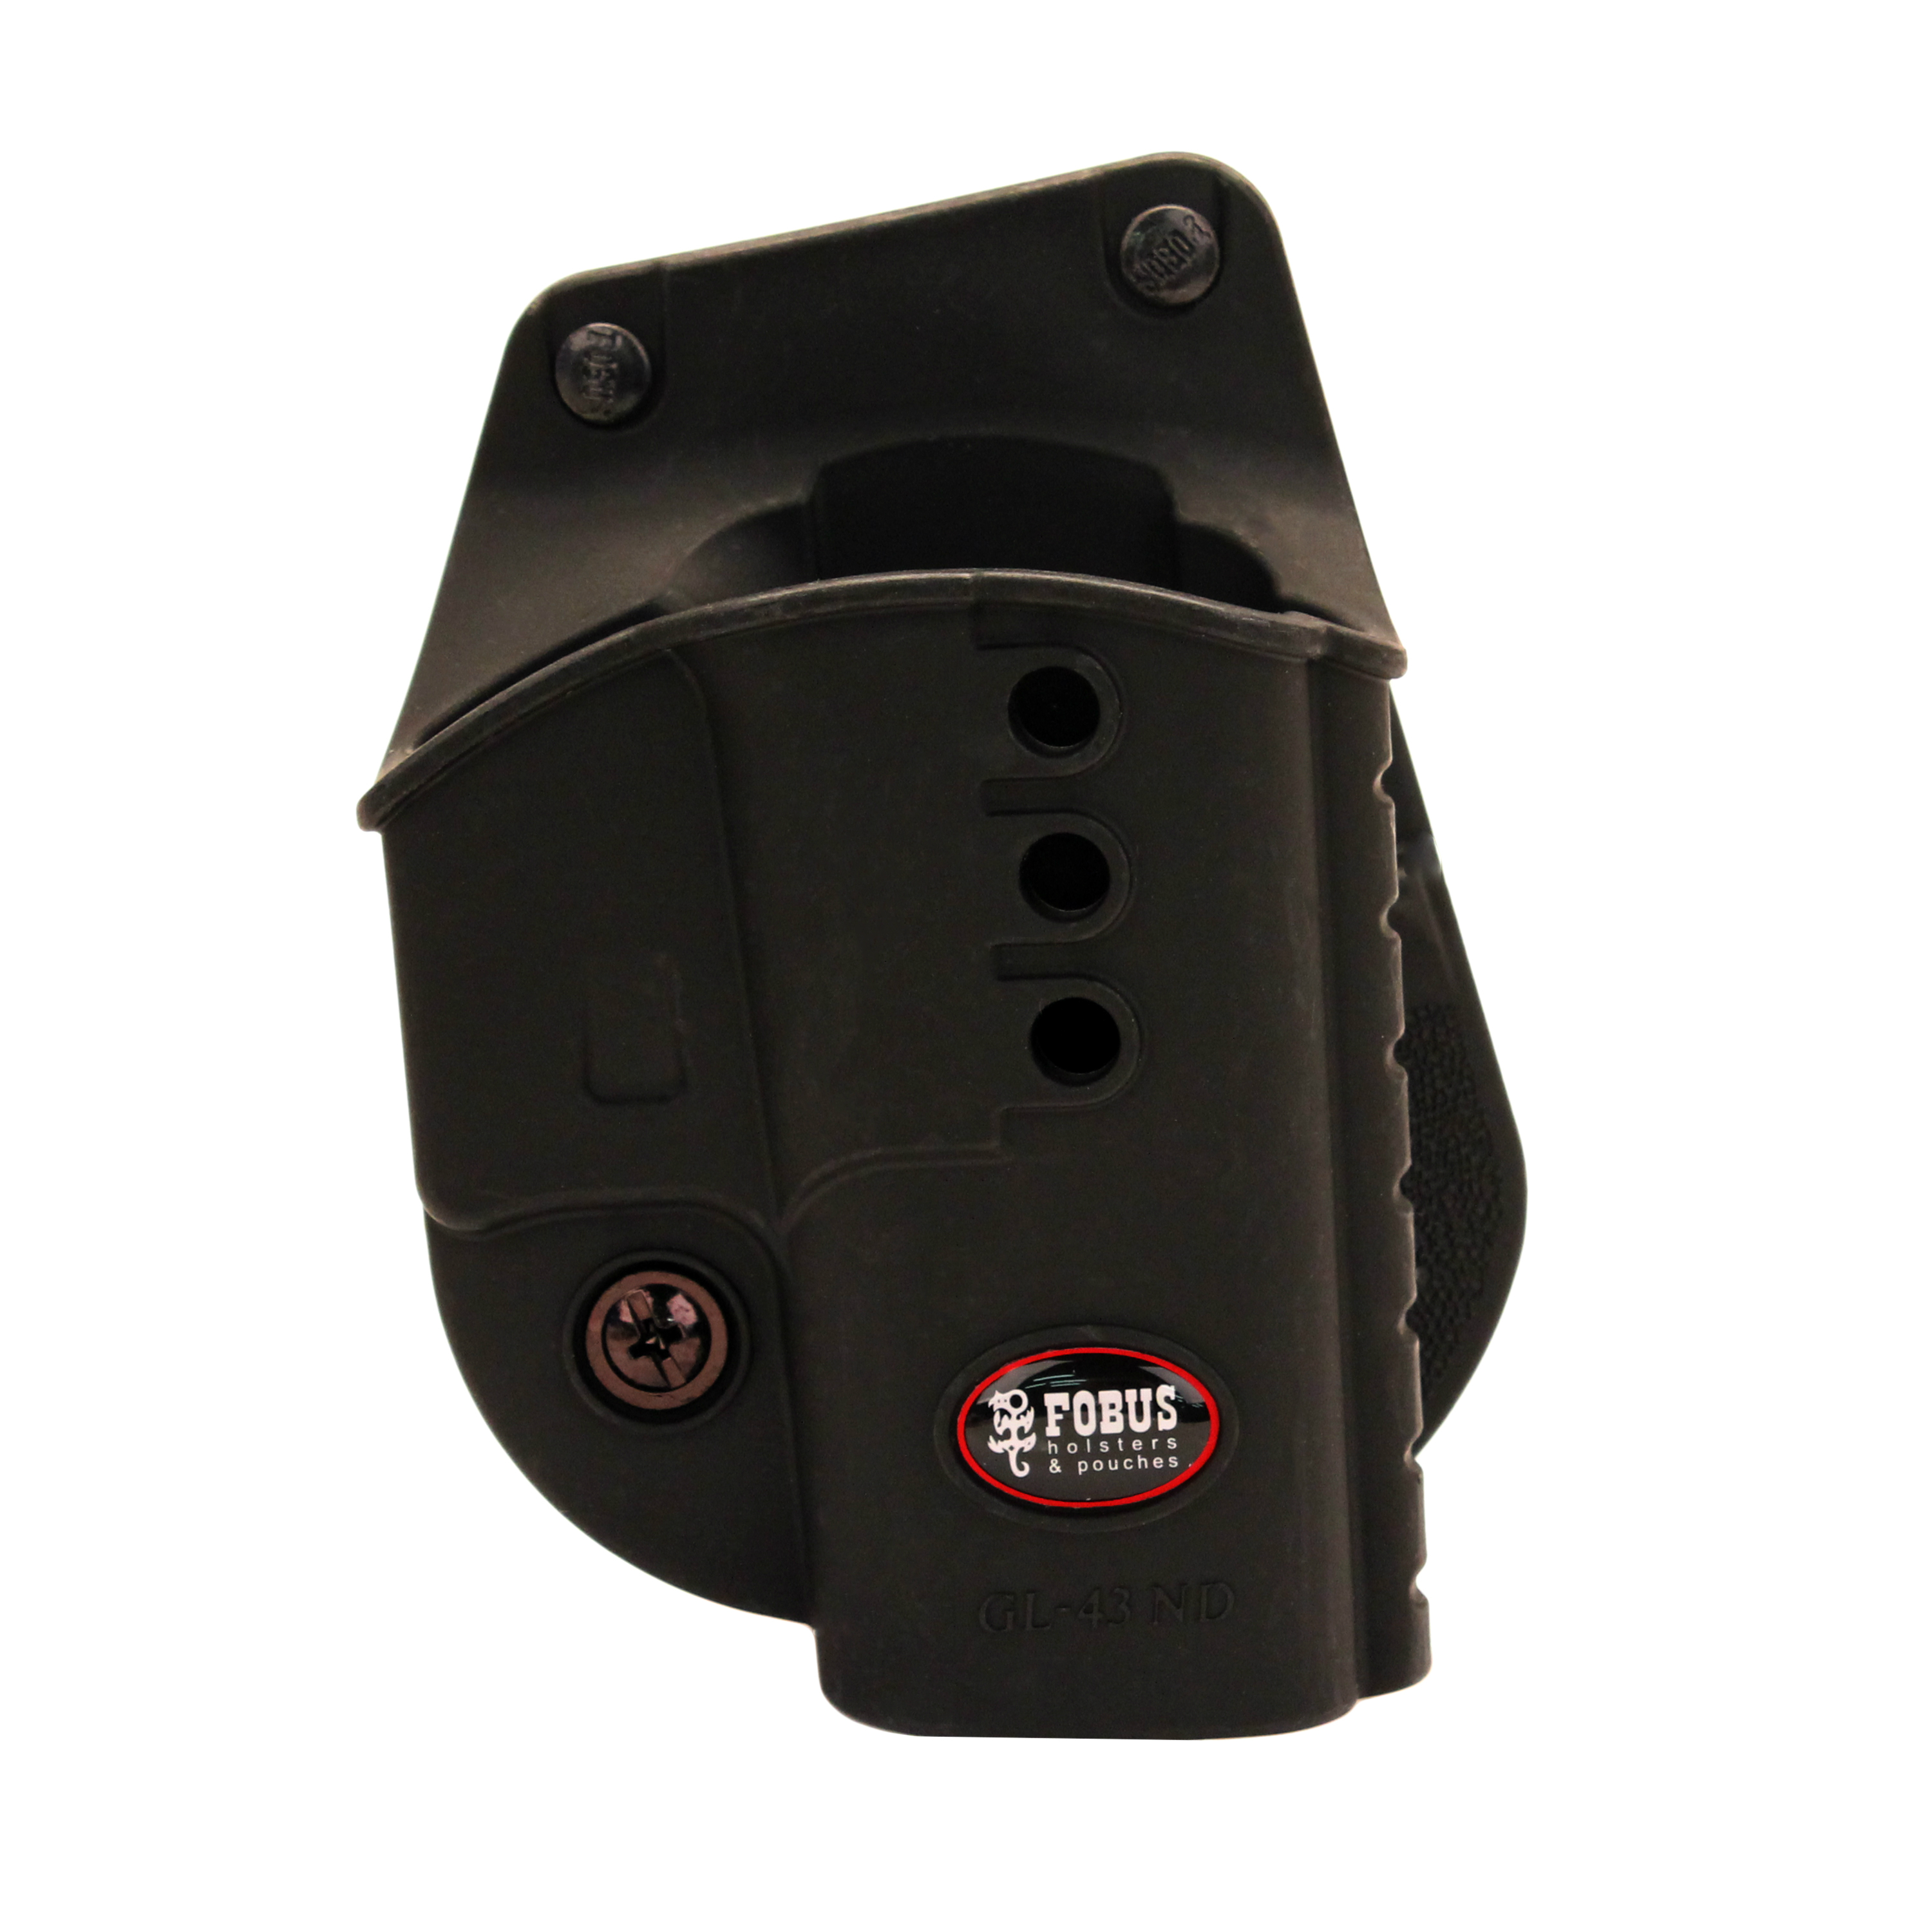 NEW Fobus Model GL43ND Paddle Holster For Glock 43 New Design Free Shipping!